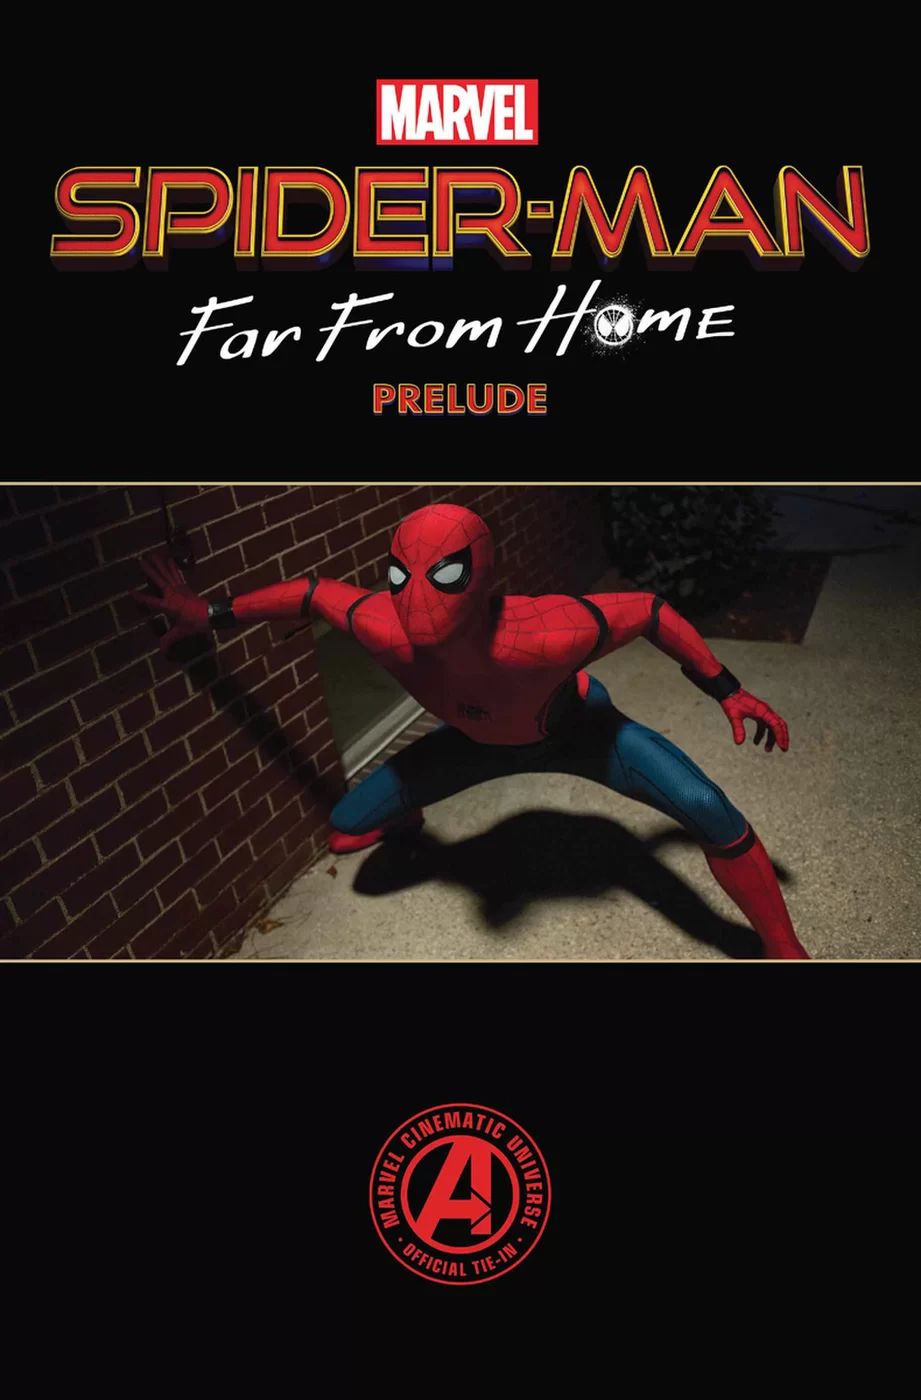 Marvel's Spider-Man Far From Home Prelude